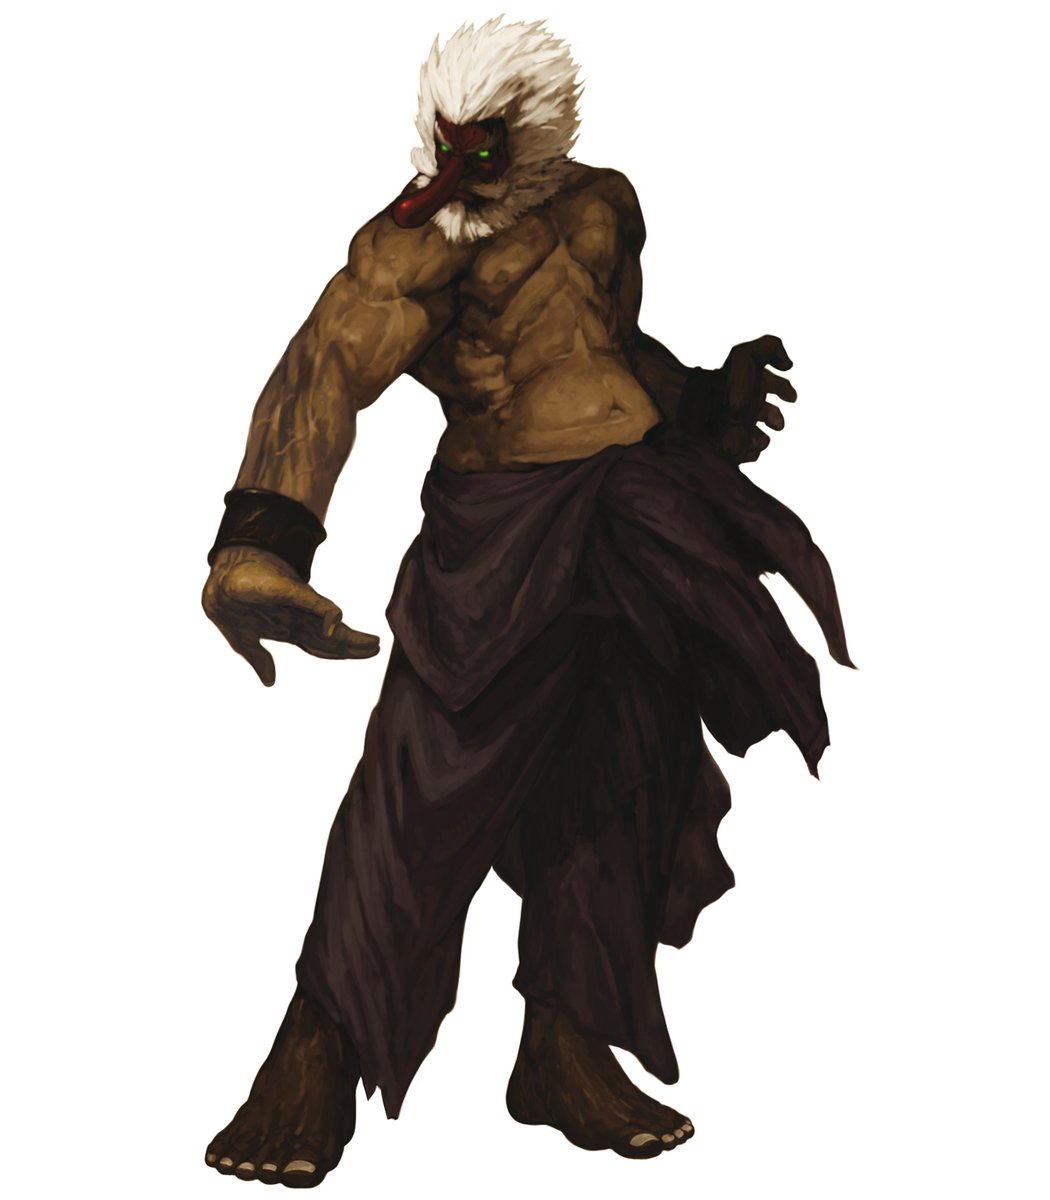 svc chaos art actually put shin akuma and mr karate directly in the same pose of those statues (but with looser belly)